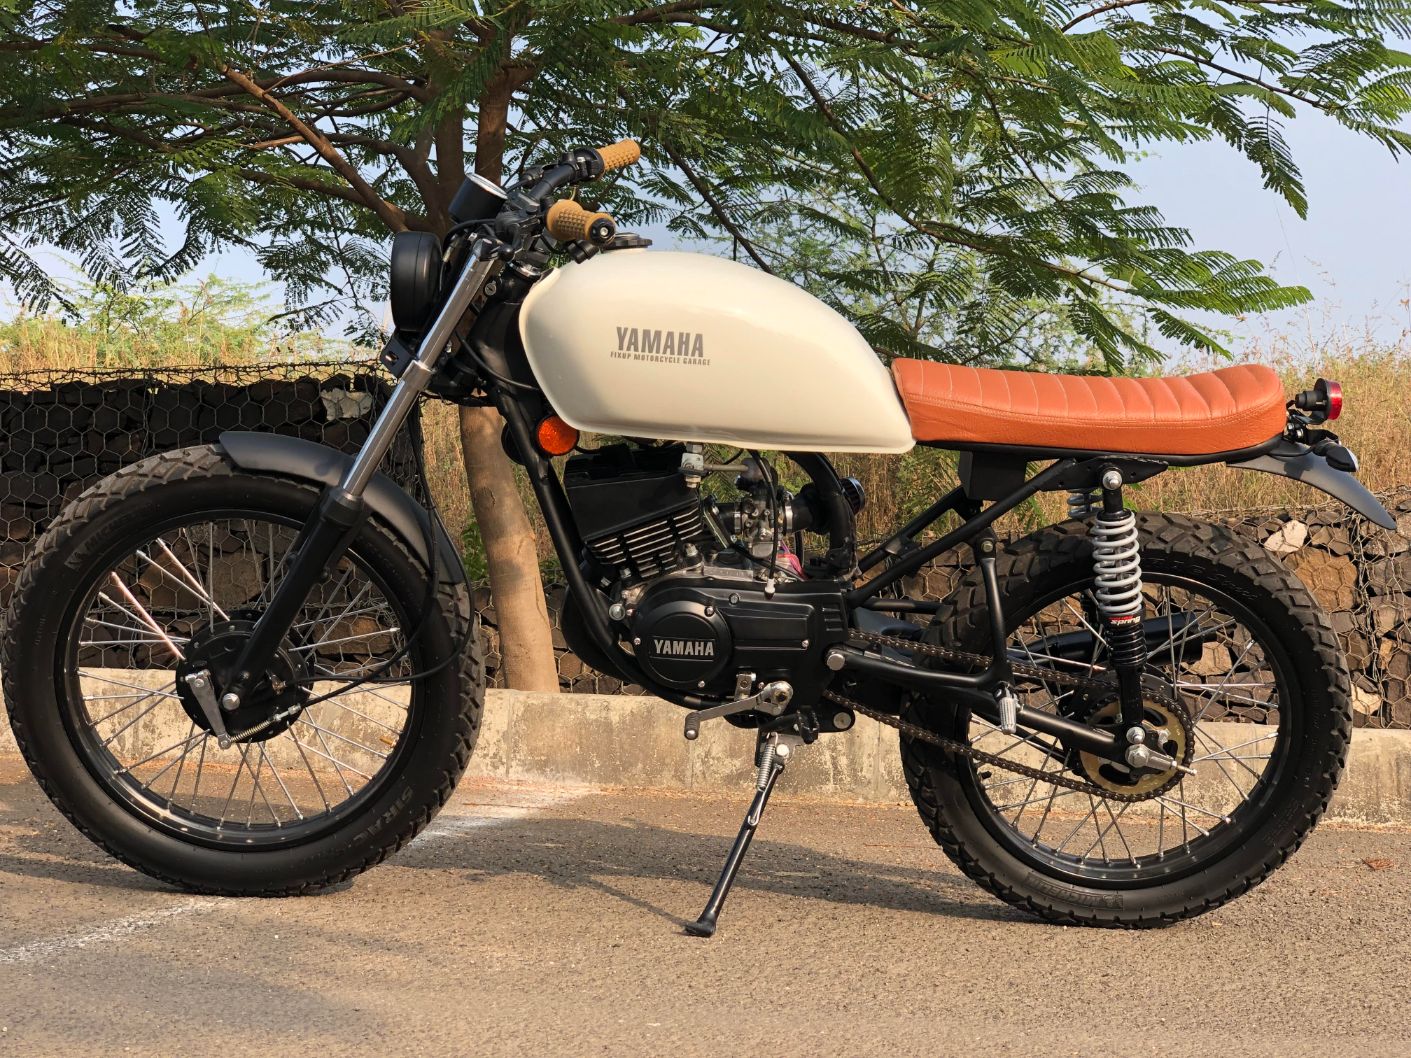 Meet Yamaha RX100 Premium Model By FIXUP Motorcycle Garage - foreground